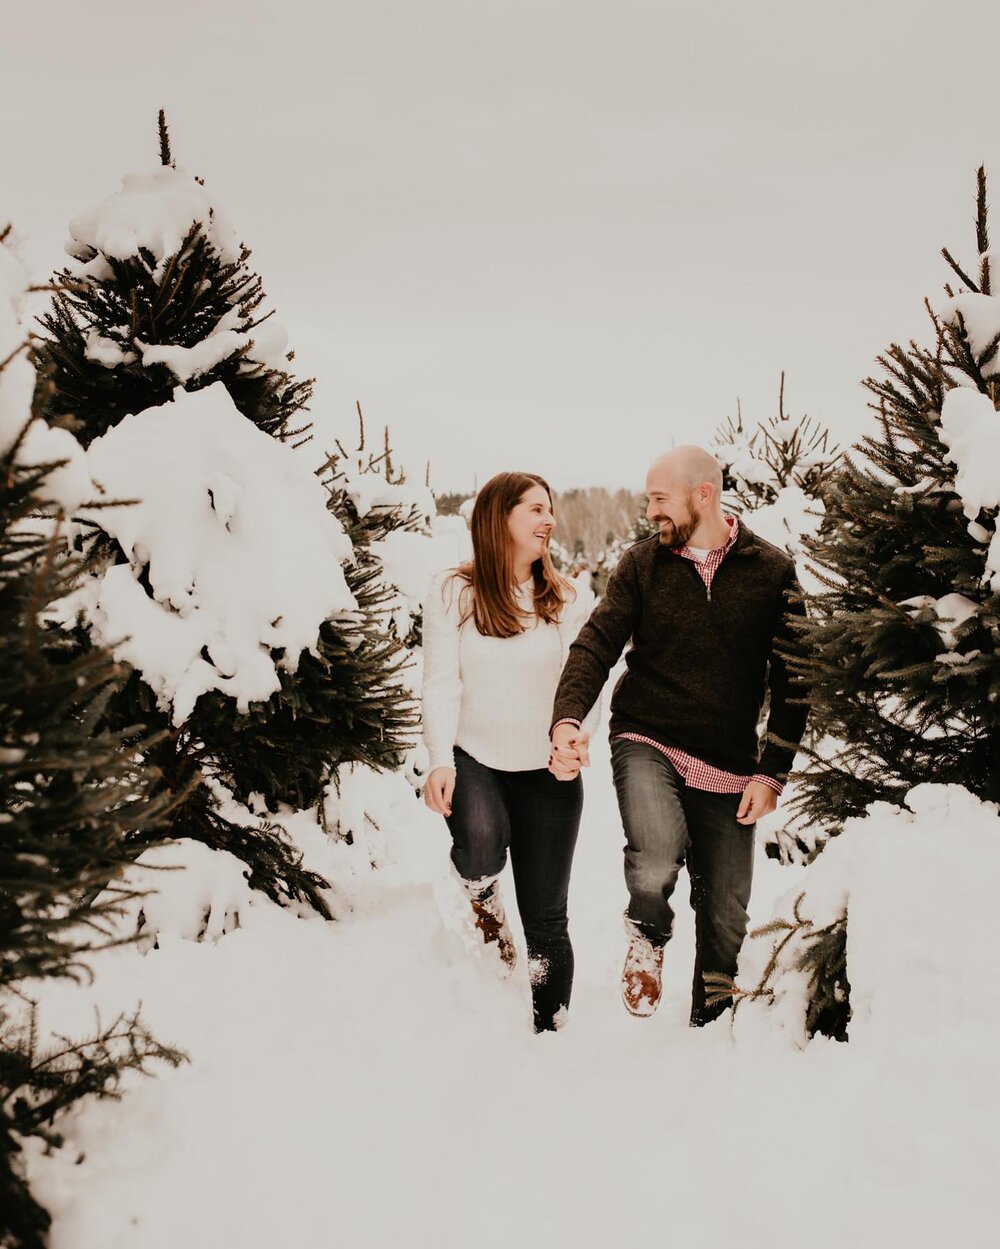 Craig and Katrina in love (and also in two feet of snow). (Sneak Peek 1/3) &bull;&bull;&bull;&bull;&bull;&bull;&bull;&bull;&bull;&bull;&bull;&bull;&bull;&bull;&bull;&bull;&bull;&bull;&bull;&bull;&bull;&bull;&bull;&bull;&bull;&bull;&bull;&bull;&bull;&bull;&bull;&bull;&bull;&bull;&bull;&bull;&bull;&bull;&bull;&bull;&bull;&bull;&bull;&bull;&bull;&bull;&bull;&bull;&bull;&bull;&bull;&bull;&bull;
#cle #cleveland #clevelandwedding #clevelandweddingphotographer #thisiscle #neoweddingphotographer  #neohioweddingphotography #clevelandweddingphotography #weddingphotography #wedding  #love #engagementphotos #engaged #clevelandengagementphotographer #amandacelisphotography #weddingwirecleveland #theknotcleveland